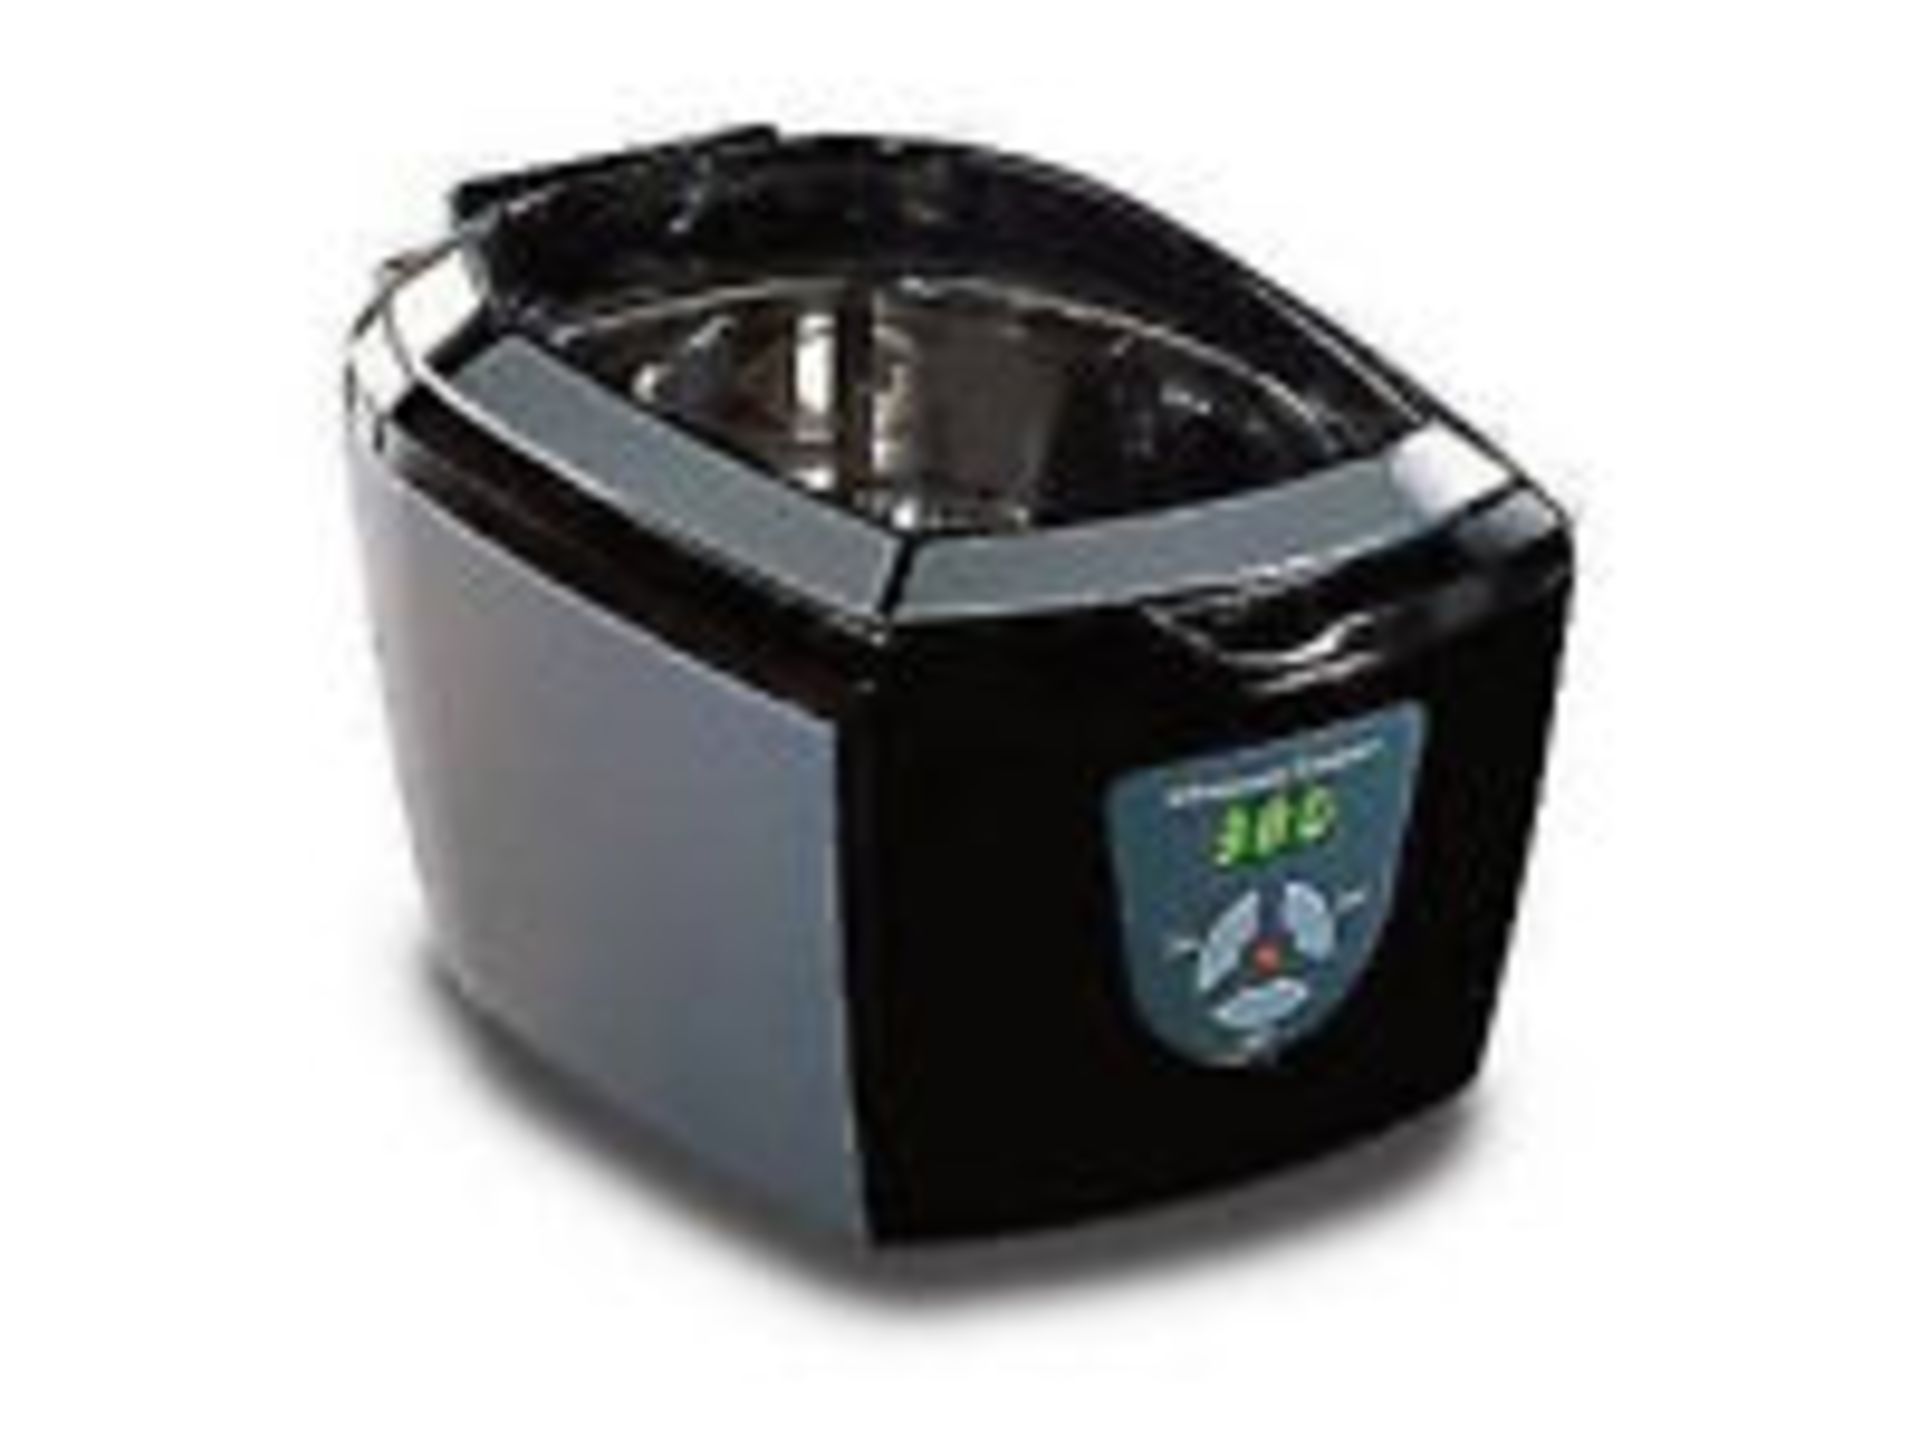 V *TRADE QTY* Brand New Delta High Living Ultrasonic Cleaner Including CD Holder-Removeable Cleaning